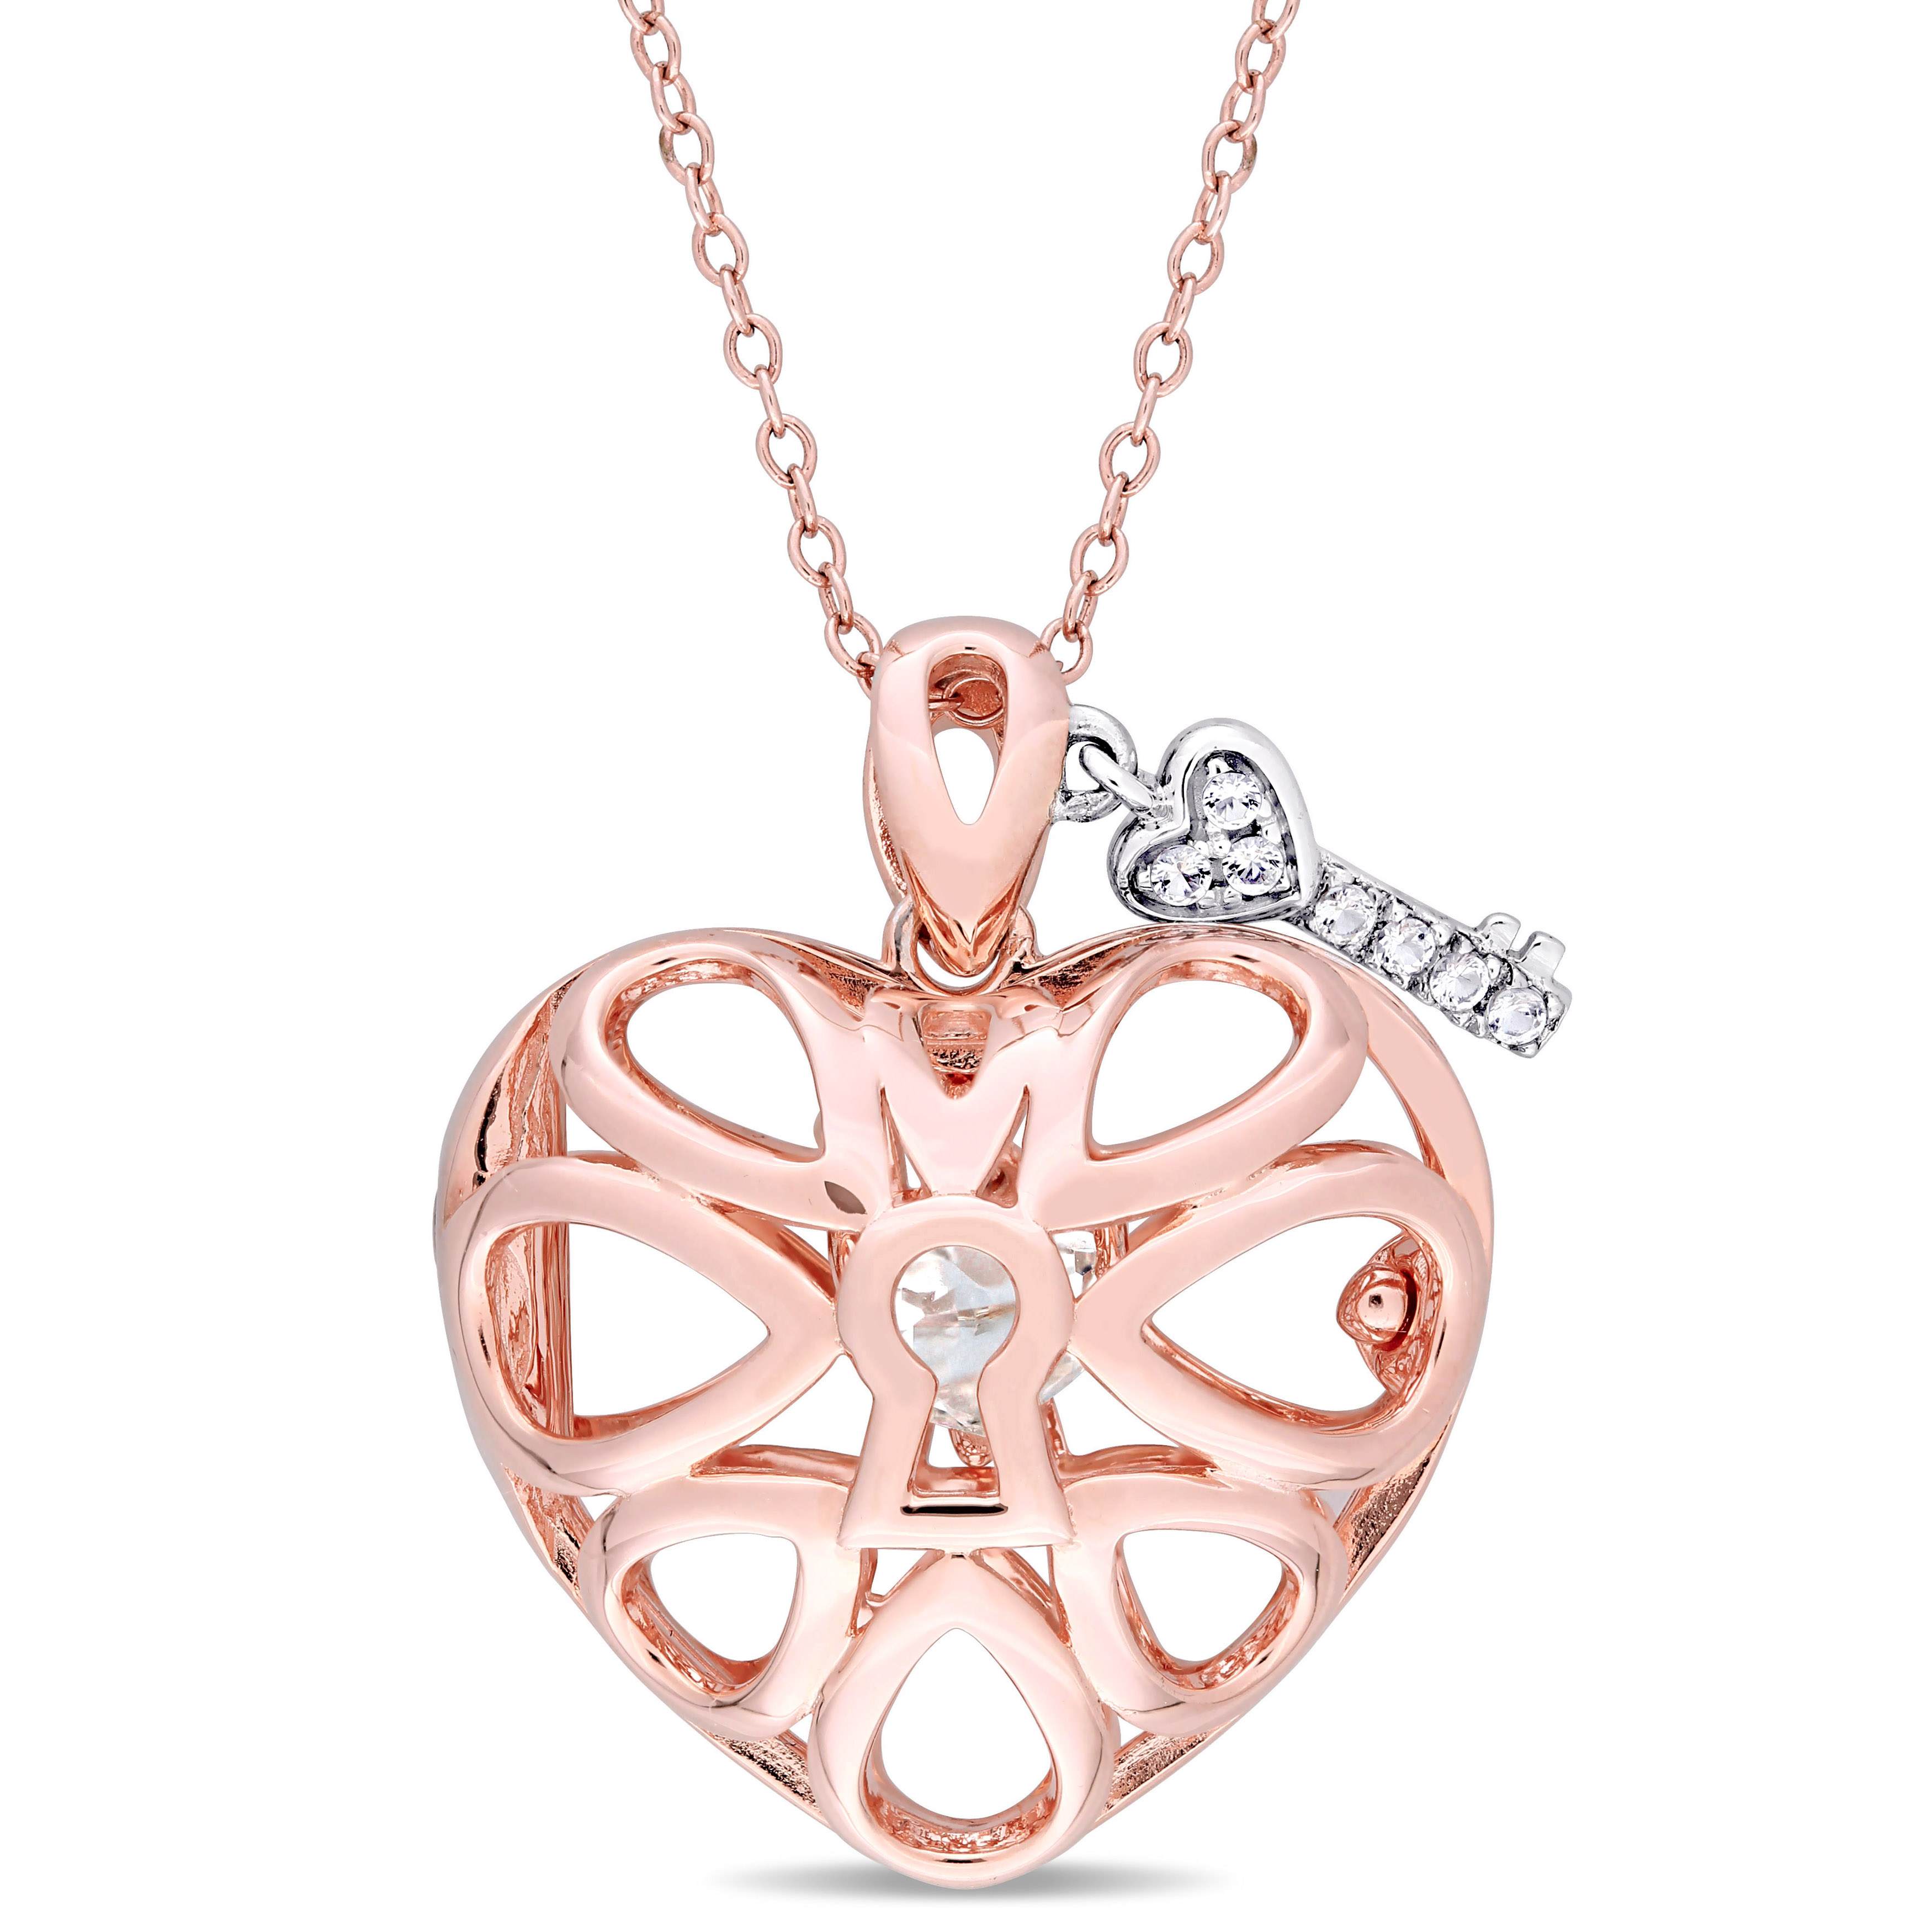 White Topaz Heart Locket and Key Pendant with Floating White Topaz in Rose Plated Sterling Silver